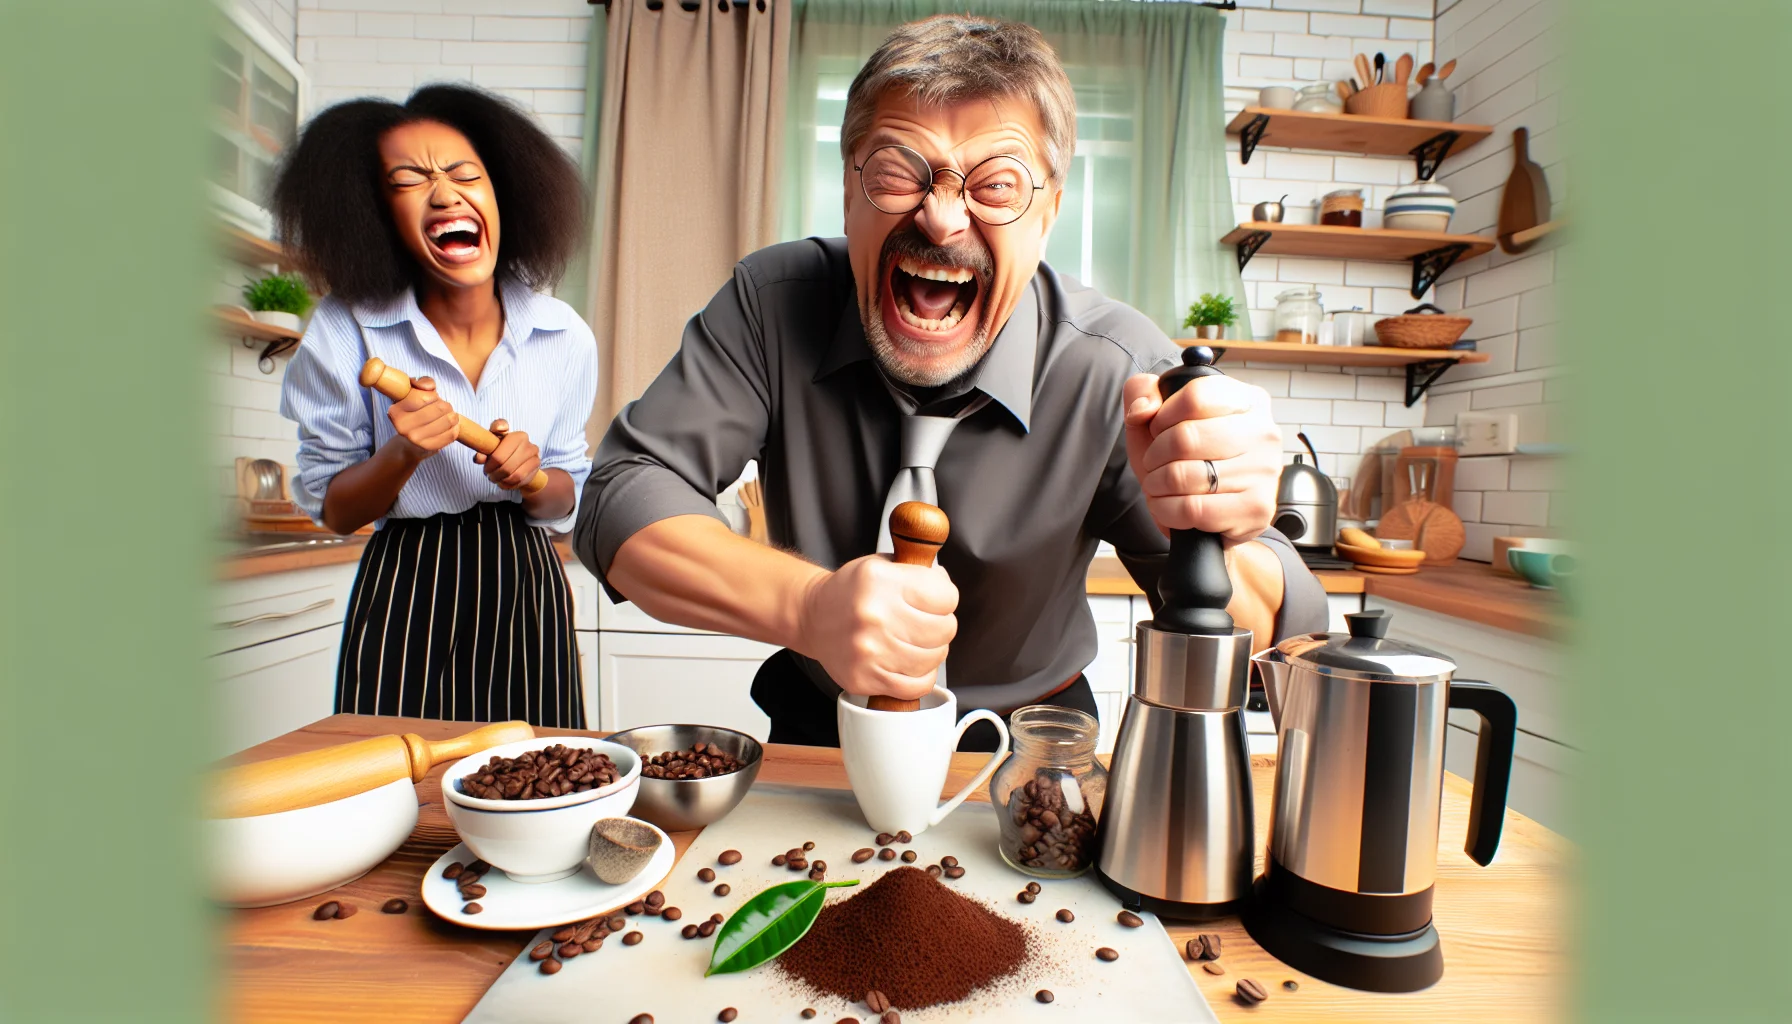 Depict an amusing scenario of a middle-aged Caucasian man trying to make an espresso at home without a machine. He is in a bright kitchen with a clutter of various kitchen appliances and ingredients strewn around, including a french press, hot water kettle, stoically grinding coffee beans with a mortar and pestle. His facial expression radiates determination, but his actions are comically exaggerated, making it a light-hearted and enjoyable scene. Nearby, a young Black woman is either laughing at the hilarious situation, or patiently teaching him the proper method, representing the joy of making and enjoying espresso.